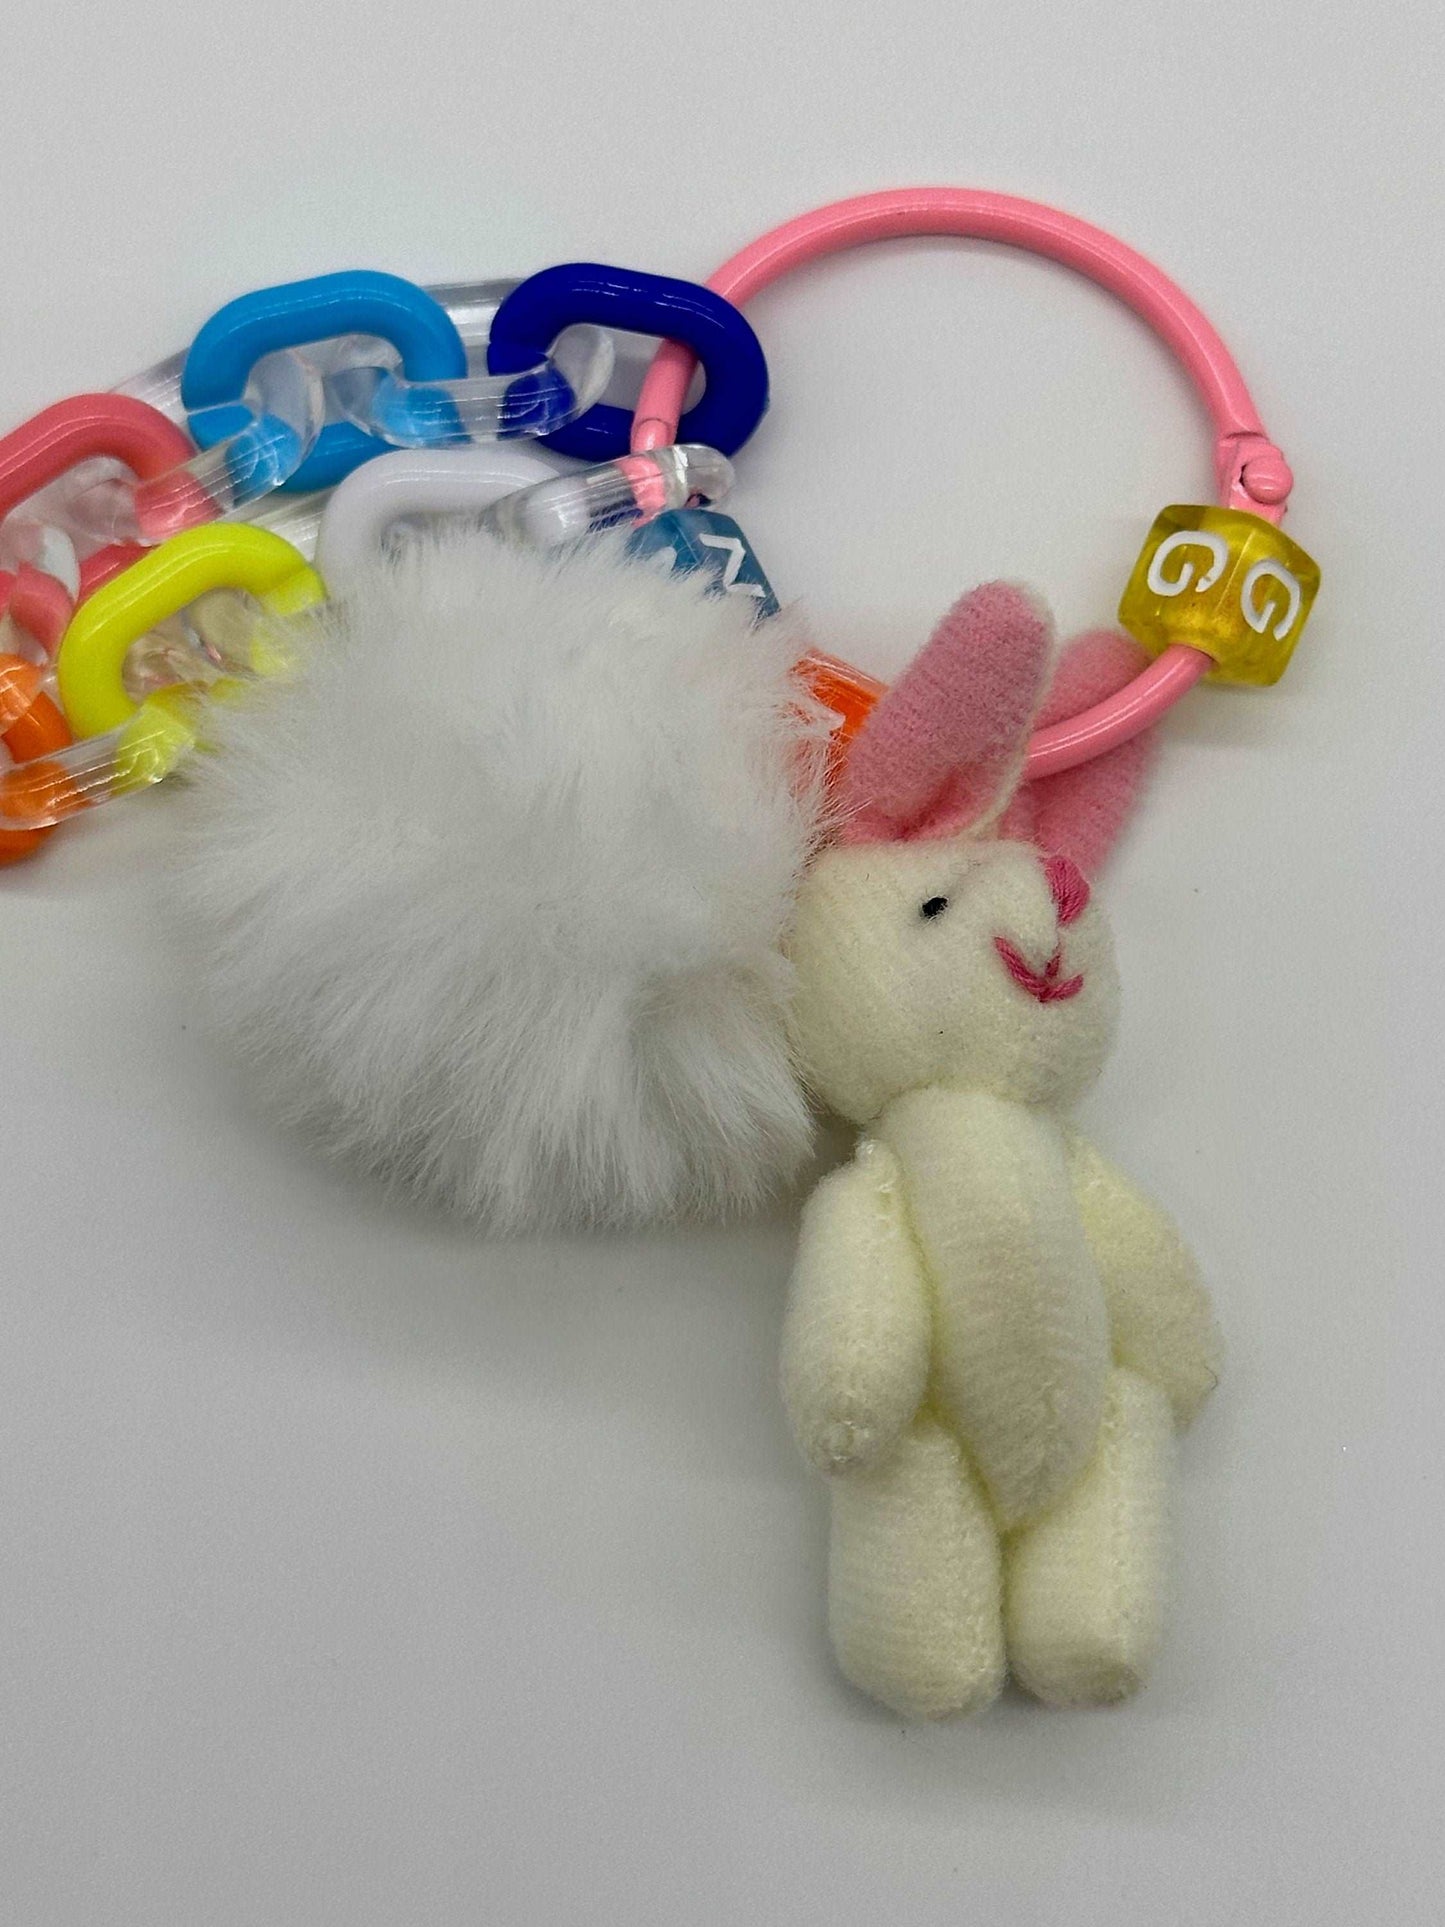 Beaded keychain, gifts for daughter, gift for a girlfriend, purse, charm, phone, charm, bunny keychain